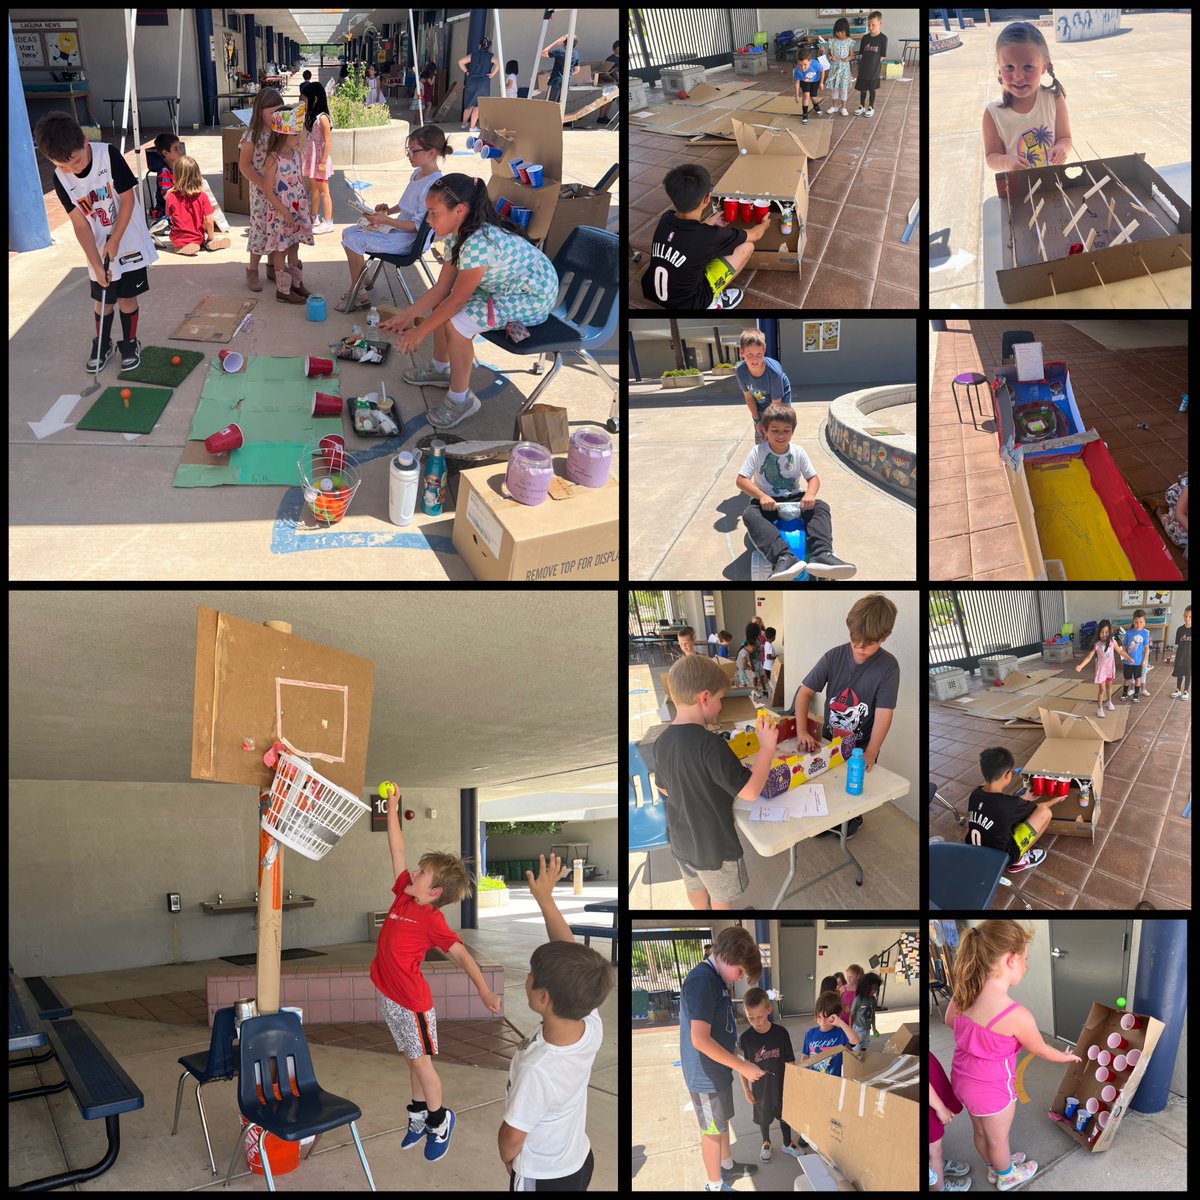 All Laguna Eagles had a chance to check out Mrs. Shamy’s 3rd, 4th, and 5th graders homemade Math Arcade games today! We all had a blast! Thank you, Eagles, for sharing your talents! 💡 #lagunaeagles #giftedandtalented #arcade #homemade #makerspace #steam #susd #BestSchoolEver